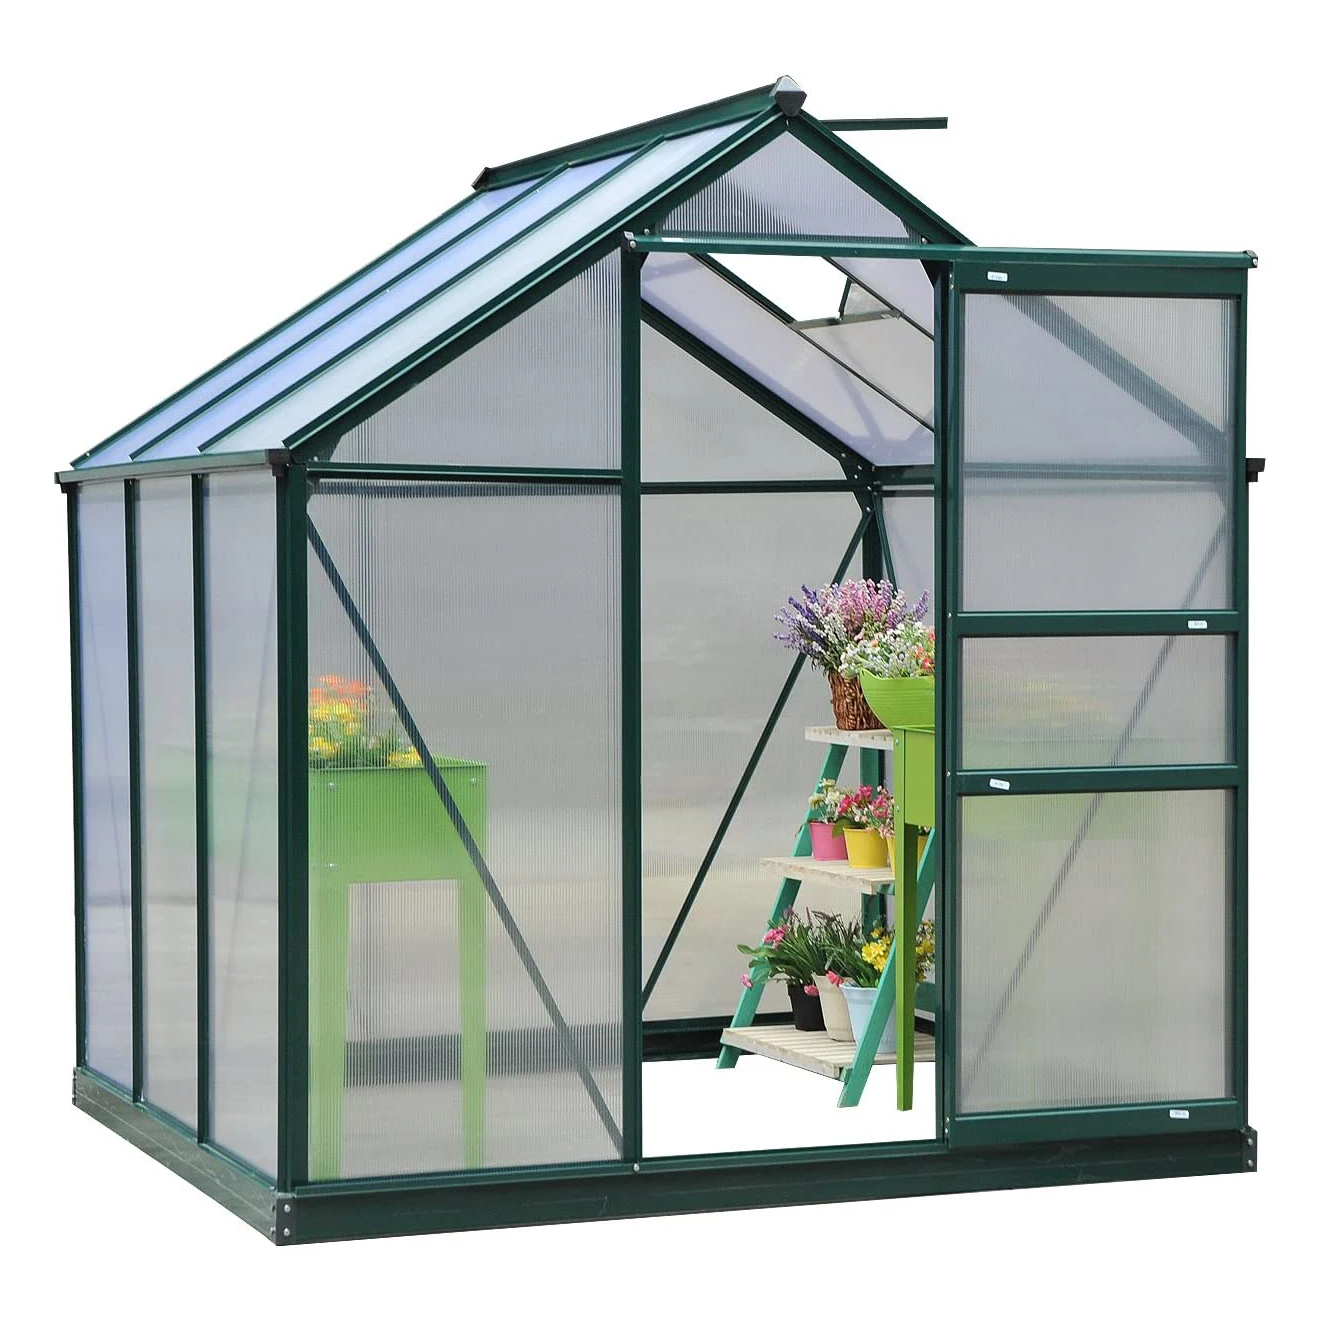 

Skyplant Professional High Quality PC board garden greenhouse for garden